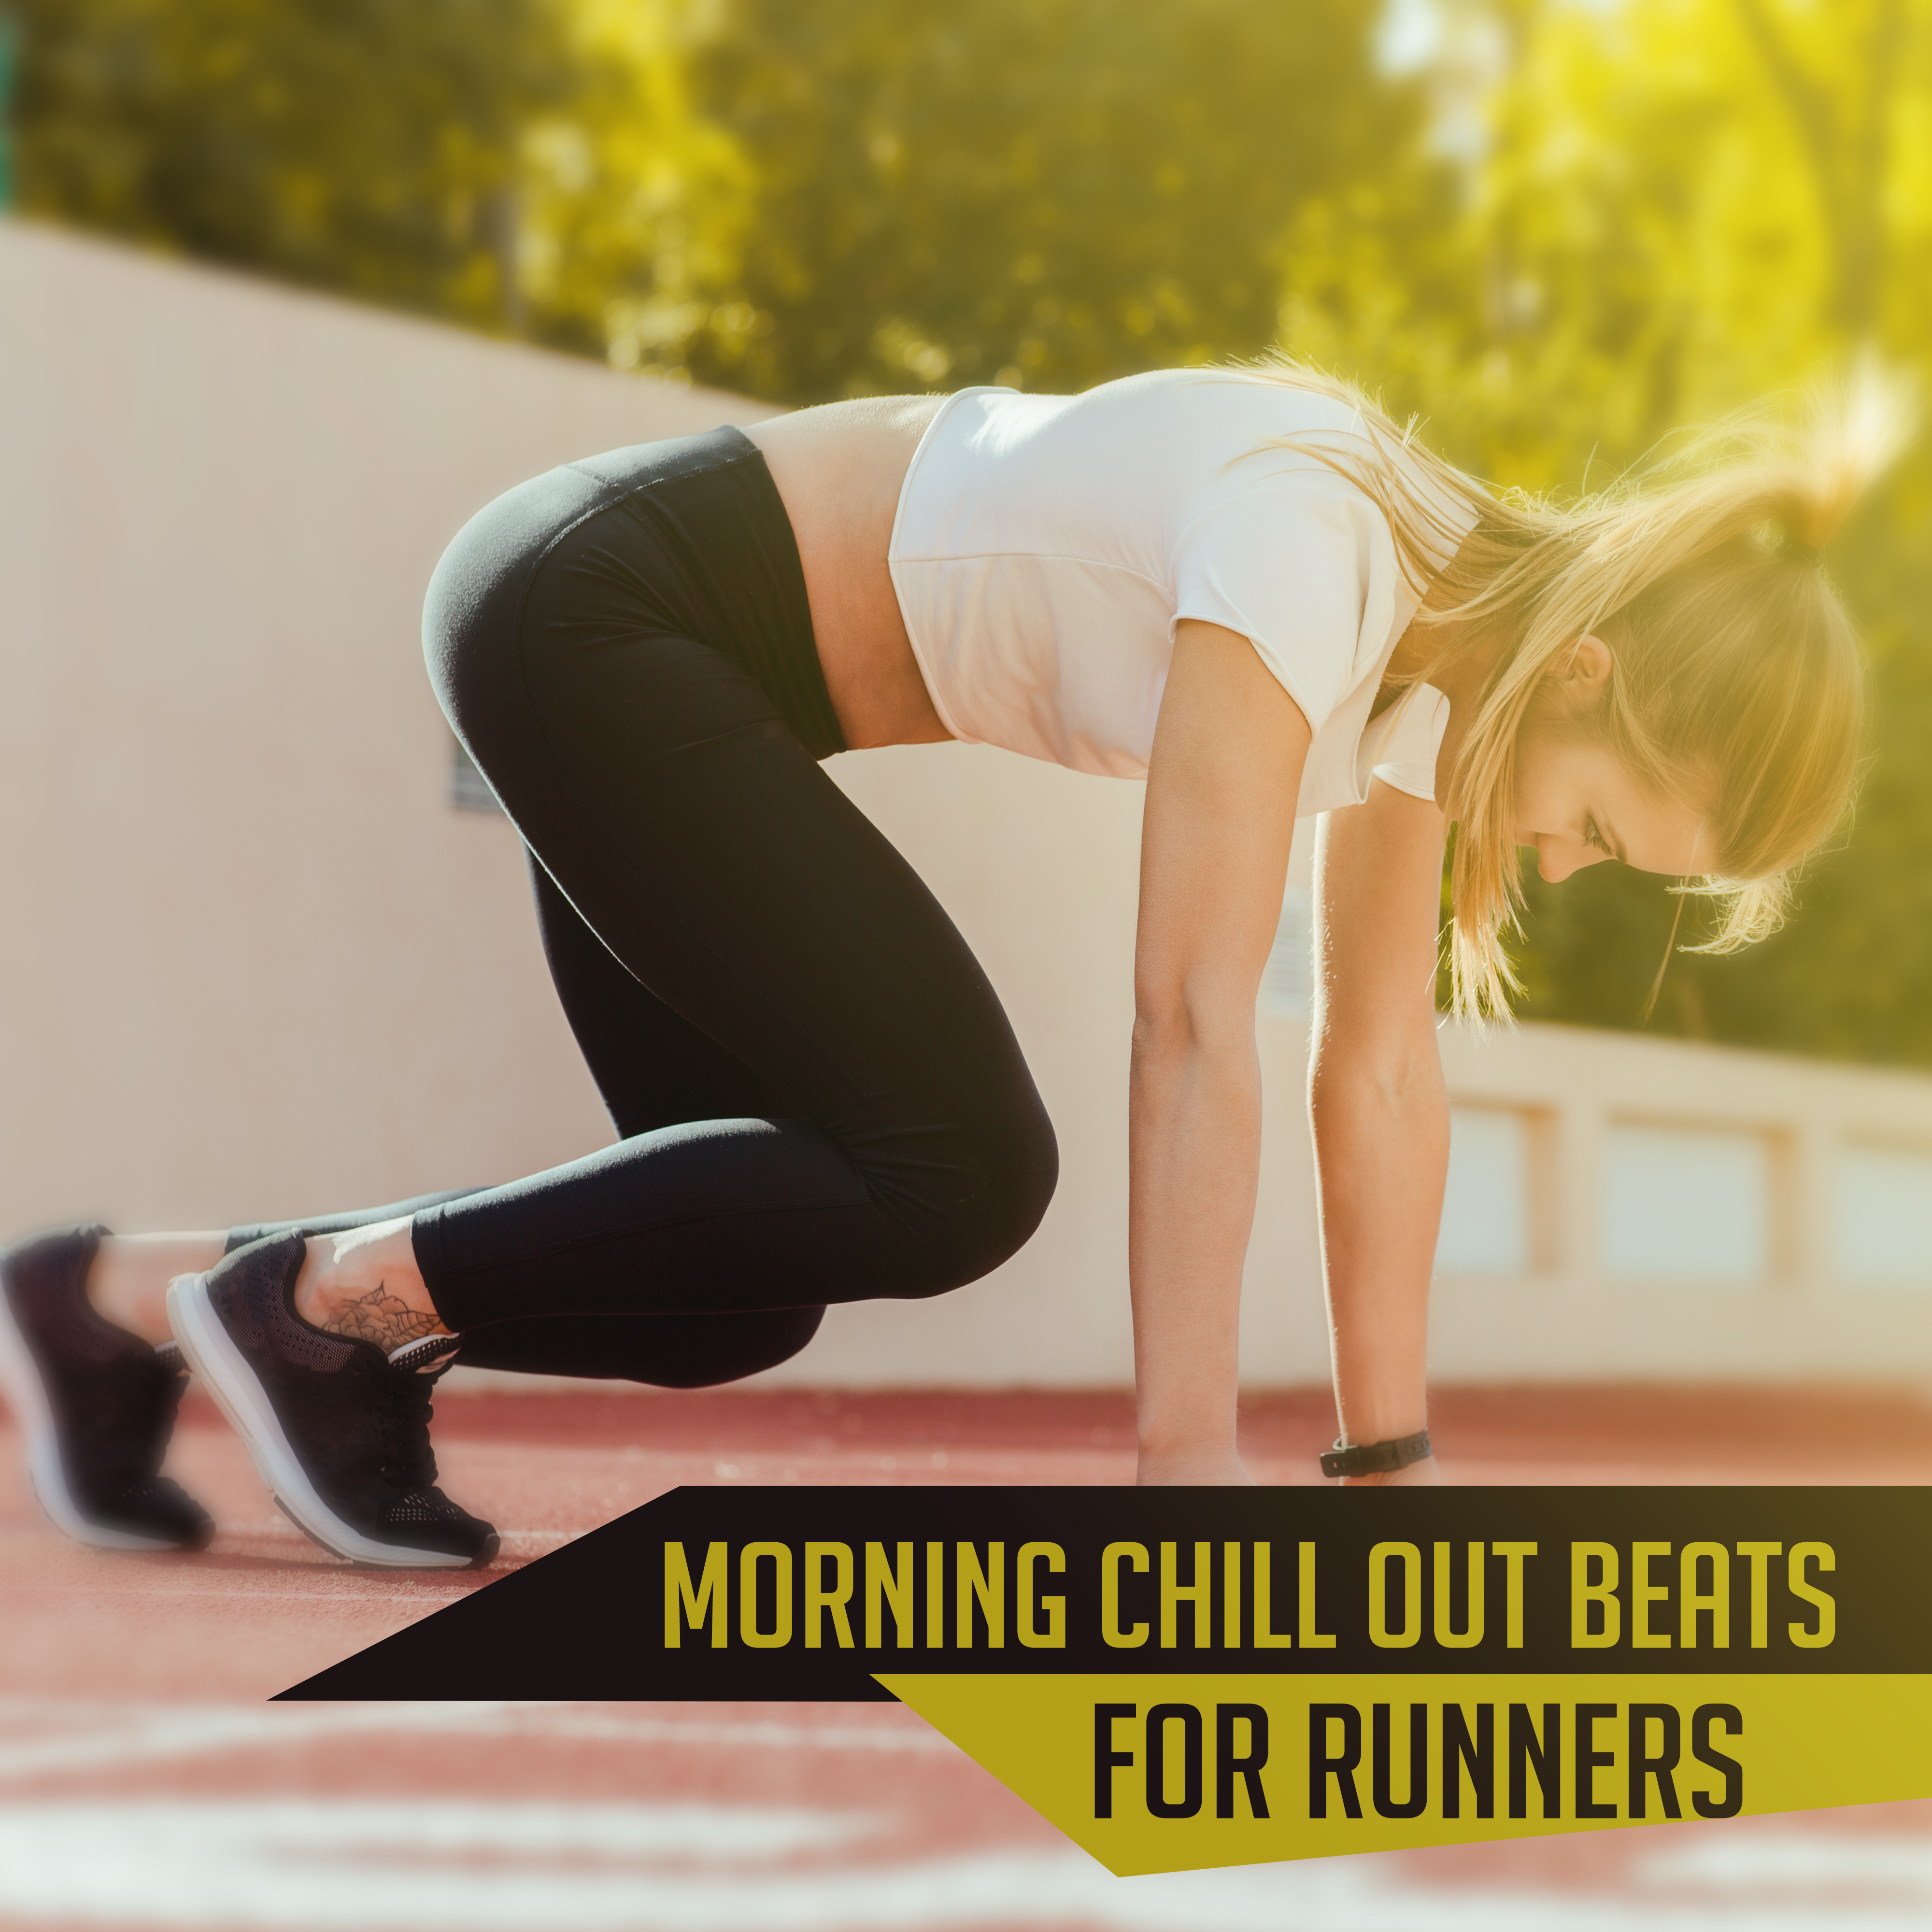 Morning Chill Out Beats for Runners  Summer Morning, Chill Out Running Hits, Easy Listening